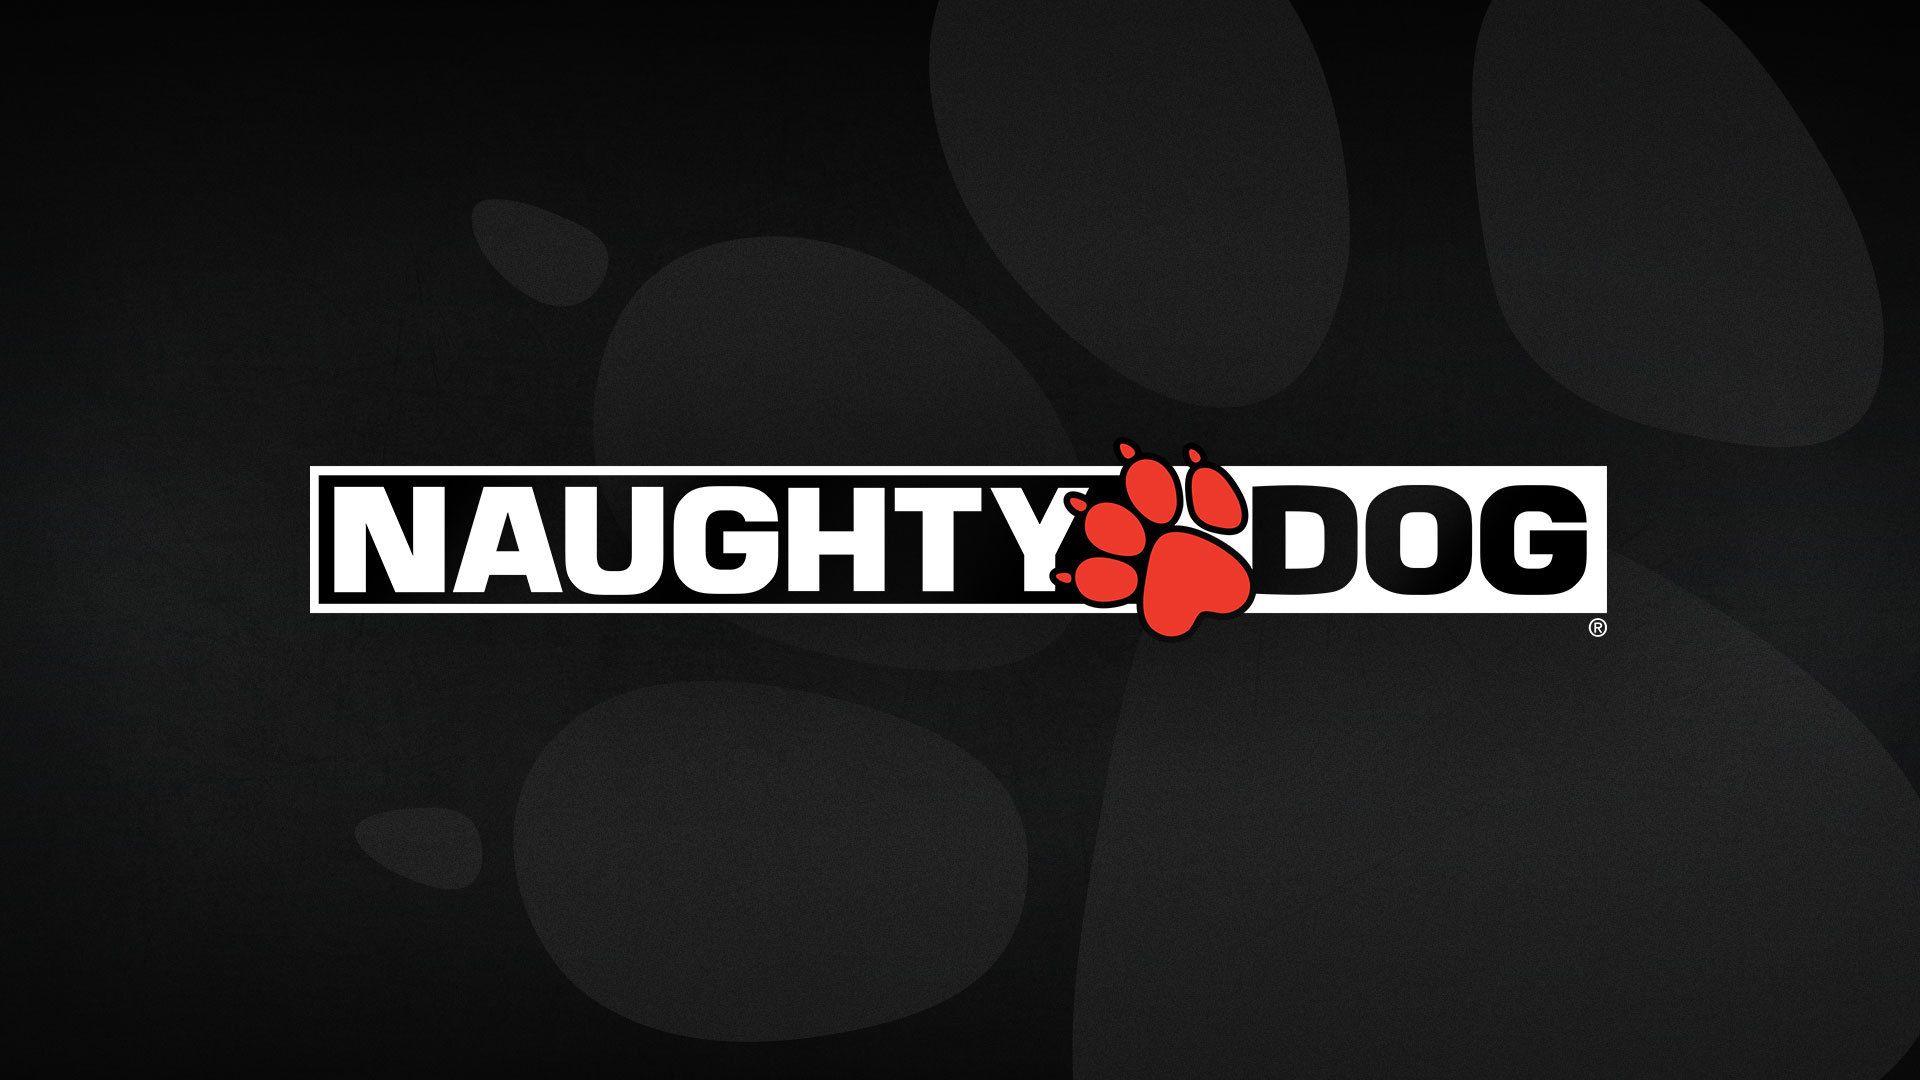 Naughty Dog publicity banner